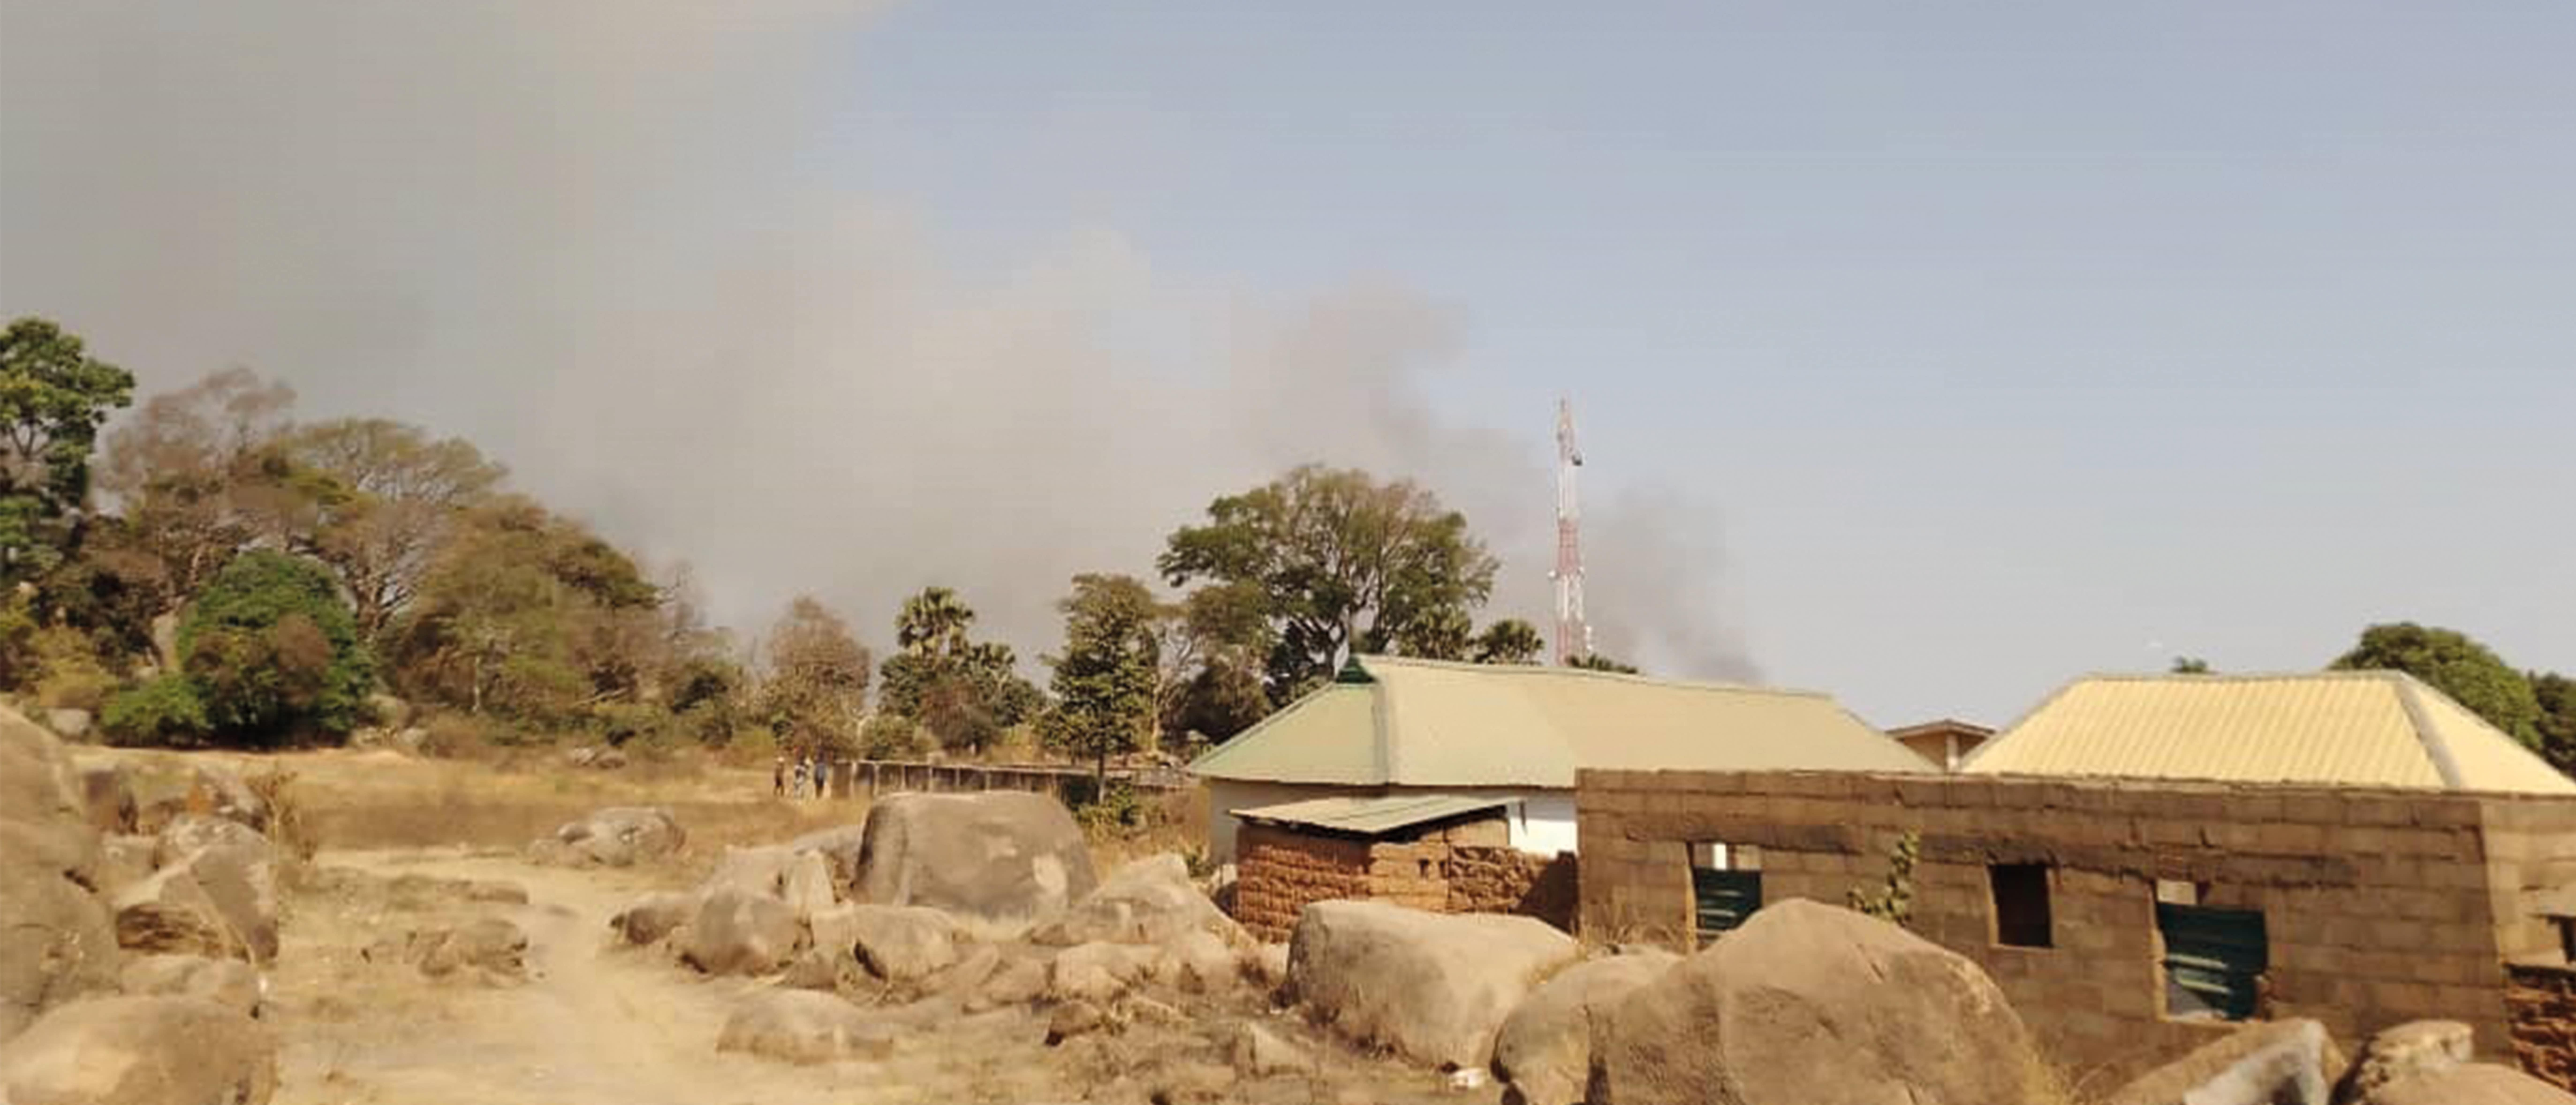 Smoke rises over buildings in Mangu town as violence breaks out between Christians and Muslims after ongoing insecurity